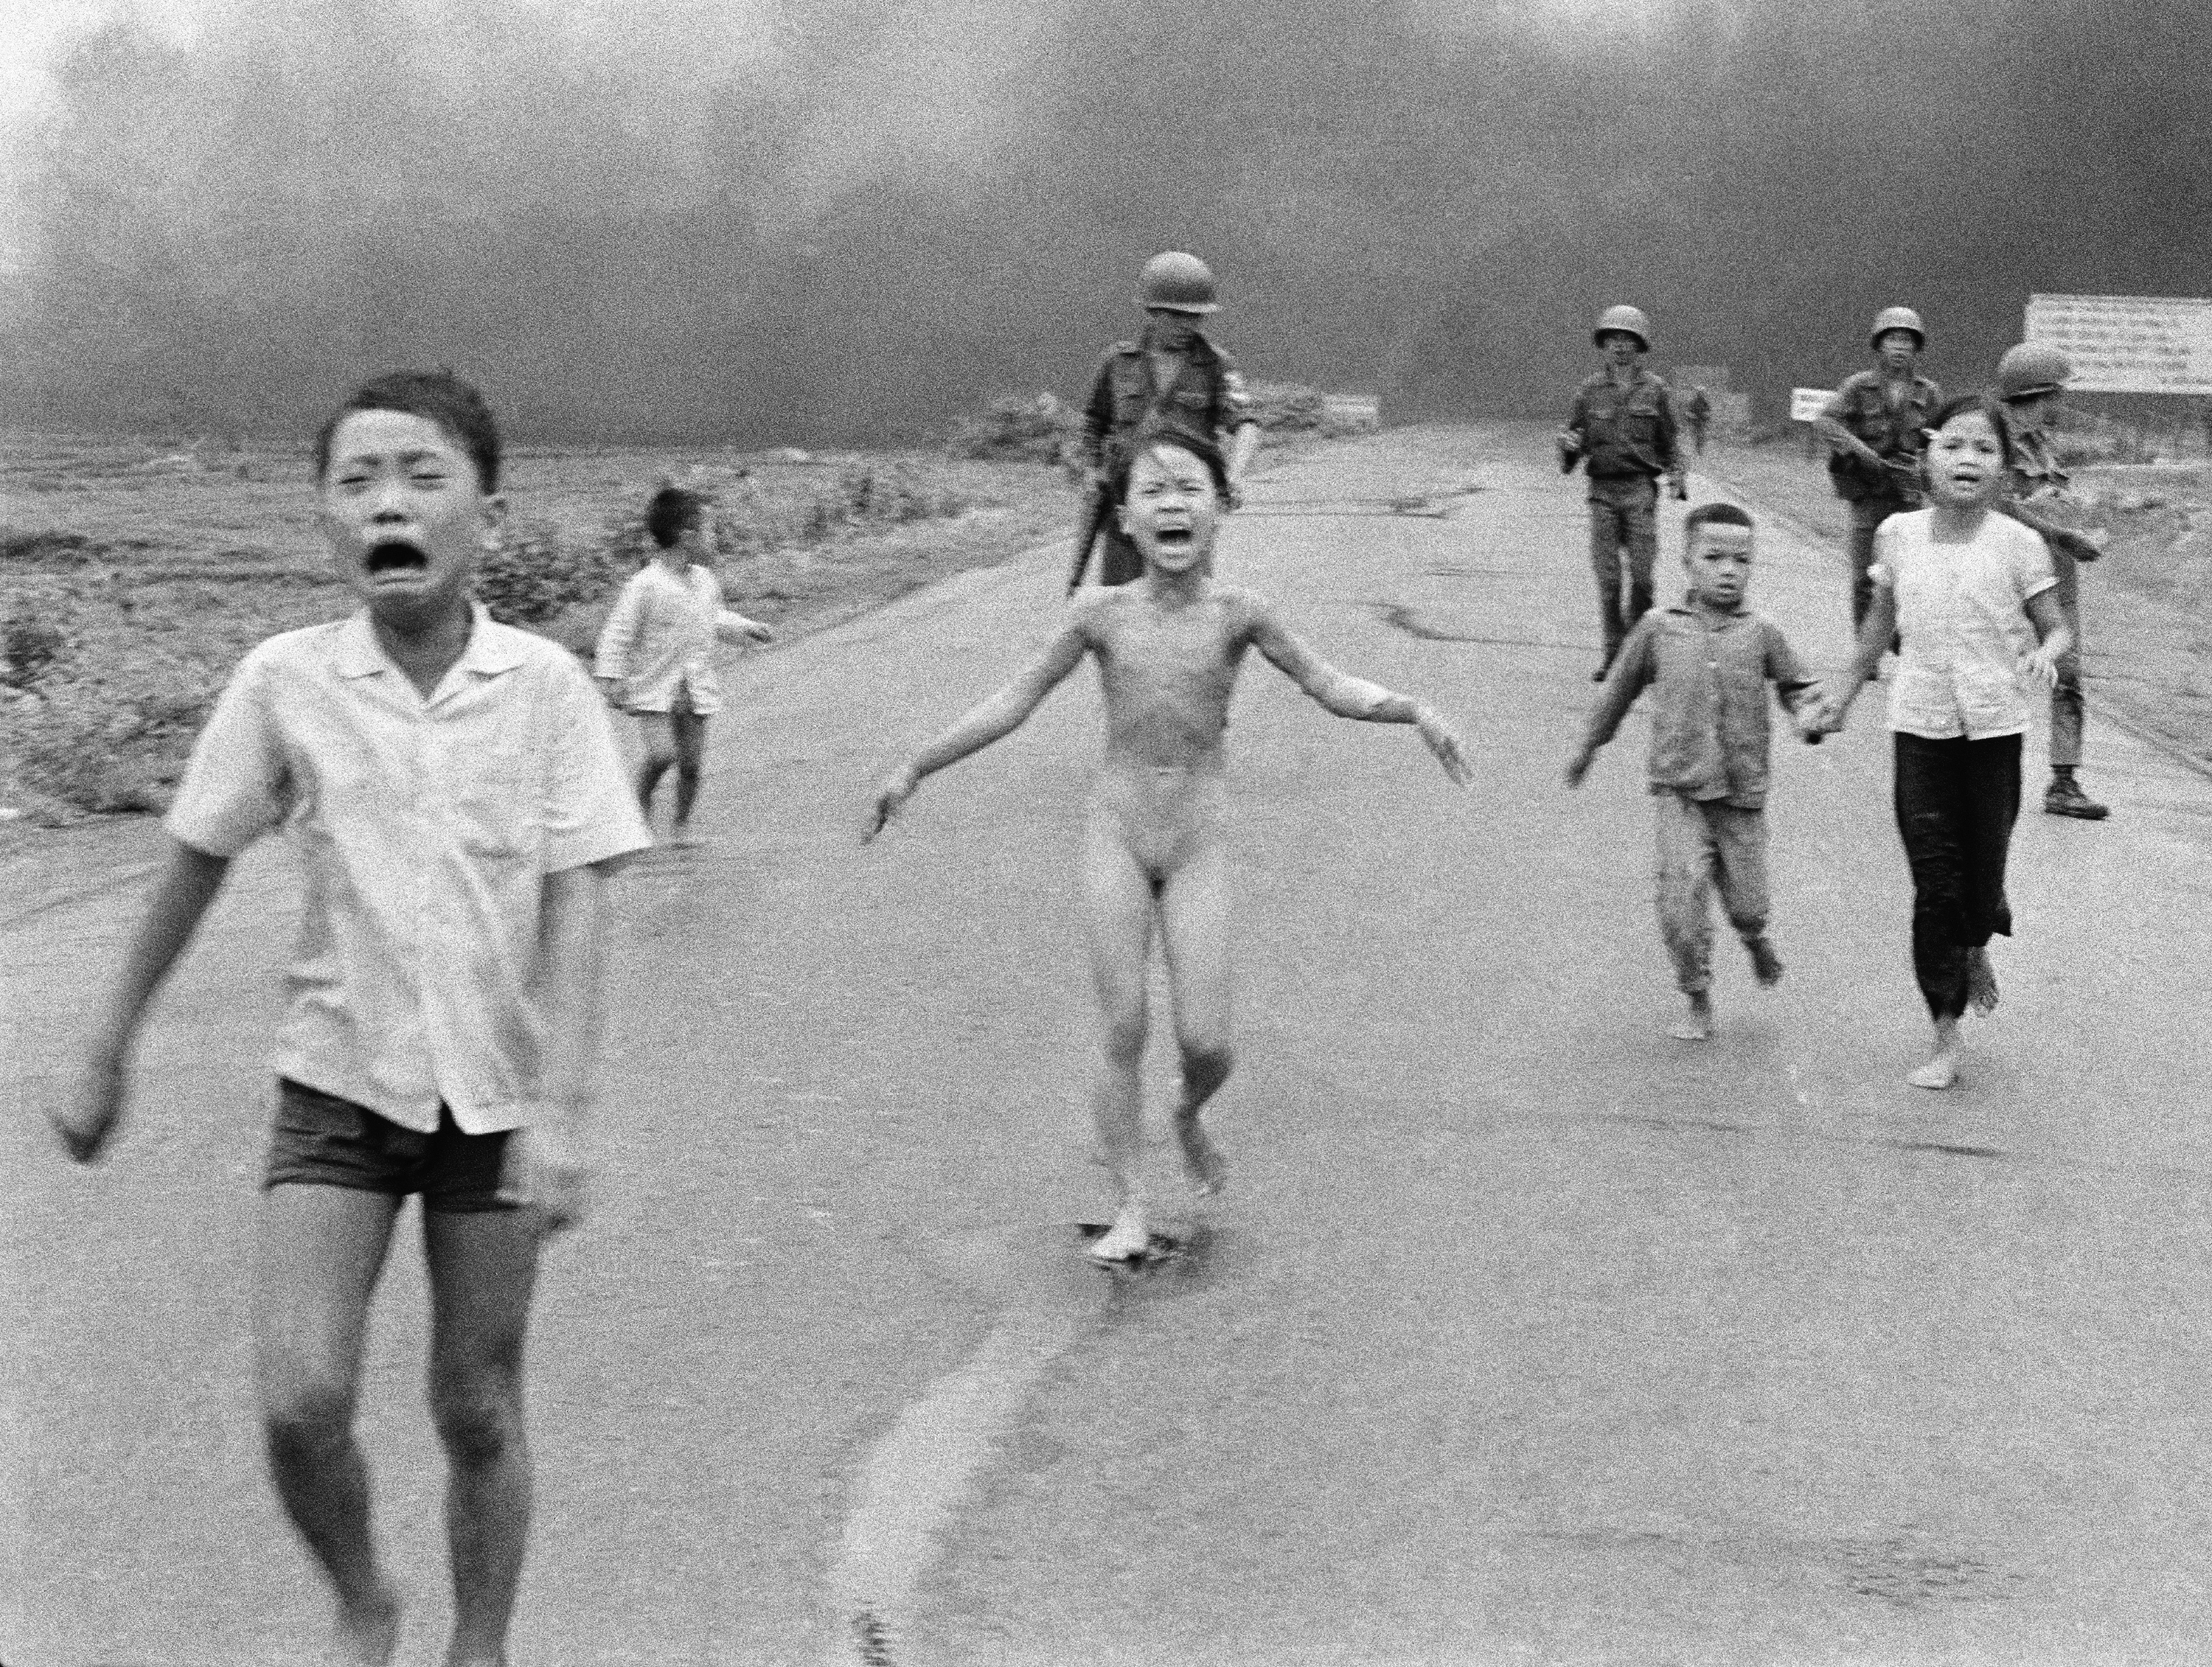 South Vietnamese forces follow after terrified children, including 9-year-old Kim Phuc, center, as they run down Route 1 near Trang Bang after an aerial napalm attack on suspected Viet Cong hiding places on June 8, 1972. A South Vietnamese plane accidentally dropped its flaming napalm on South Vietnamese troops and civilians. The terrified girl had ripped off her burning clothes while fleeing. The children from left to right are: Phan Thanh Tam, younger brother of Kim Phuc, who lost an eye, Phan Thanh Phouc, youngest brother of Kim Phuc, Kim Phuc, and Kim's cousins Ho Van Bon, and Ho Thi Ting. Behind them are soldiers of the Vietnam Army 25th Division. (AP Photo/Nick Ut)